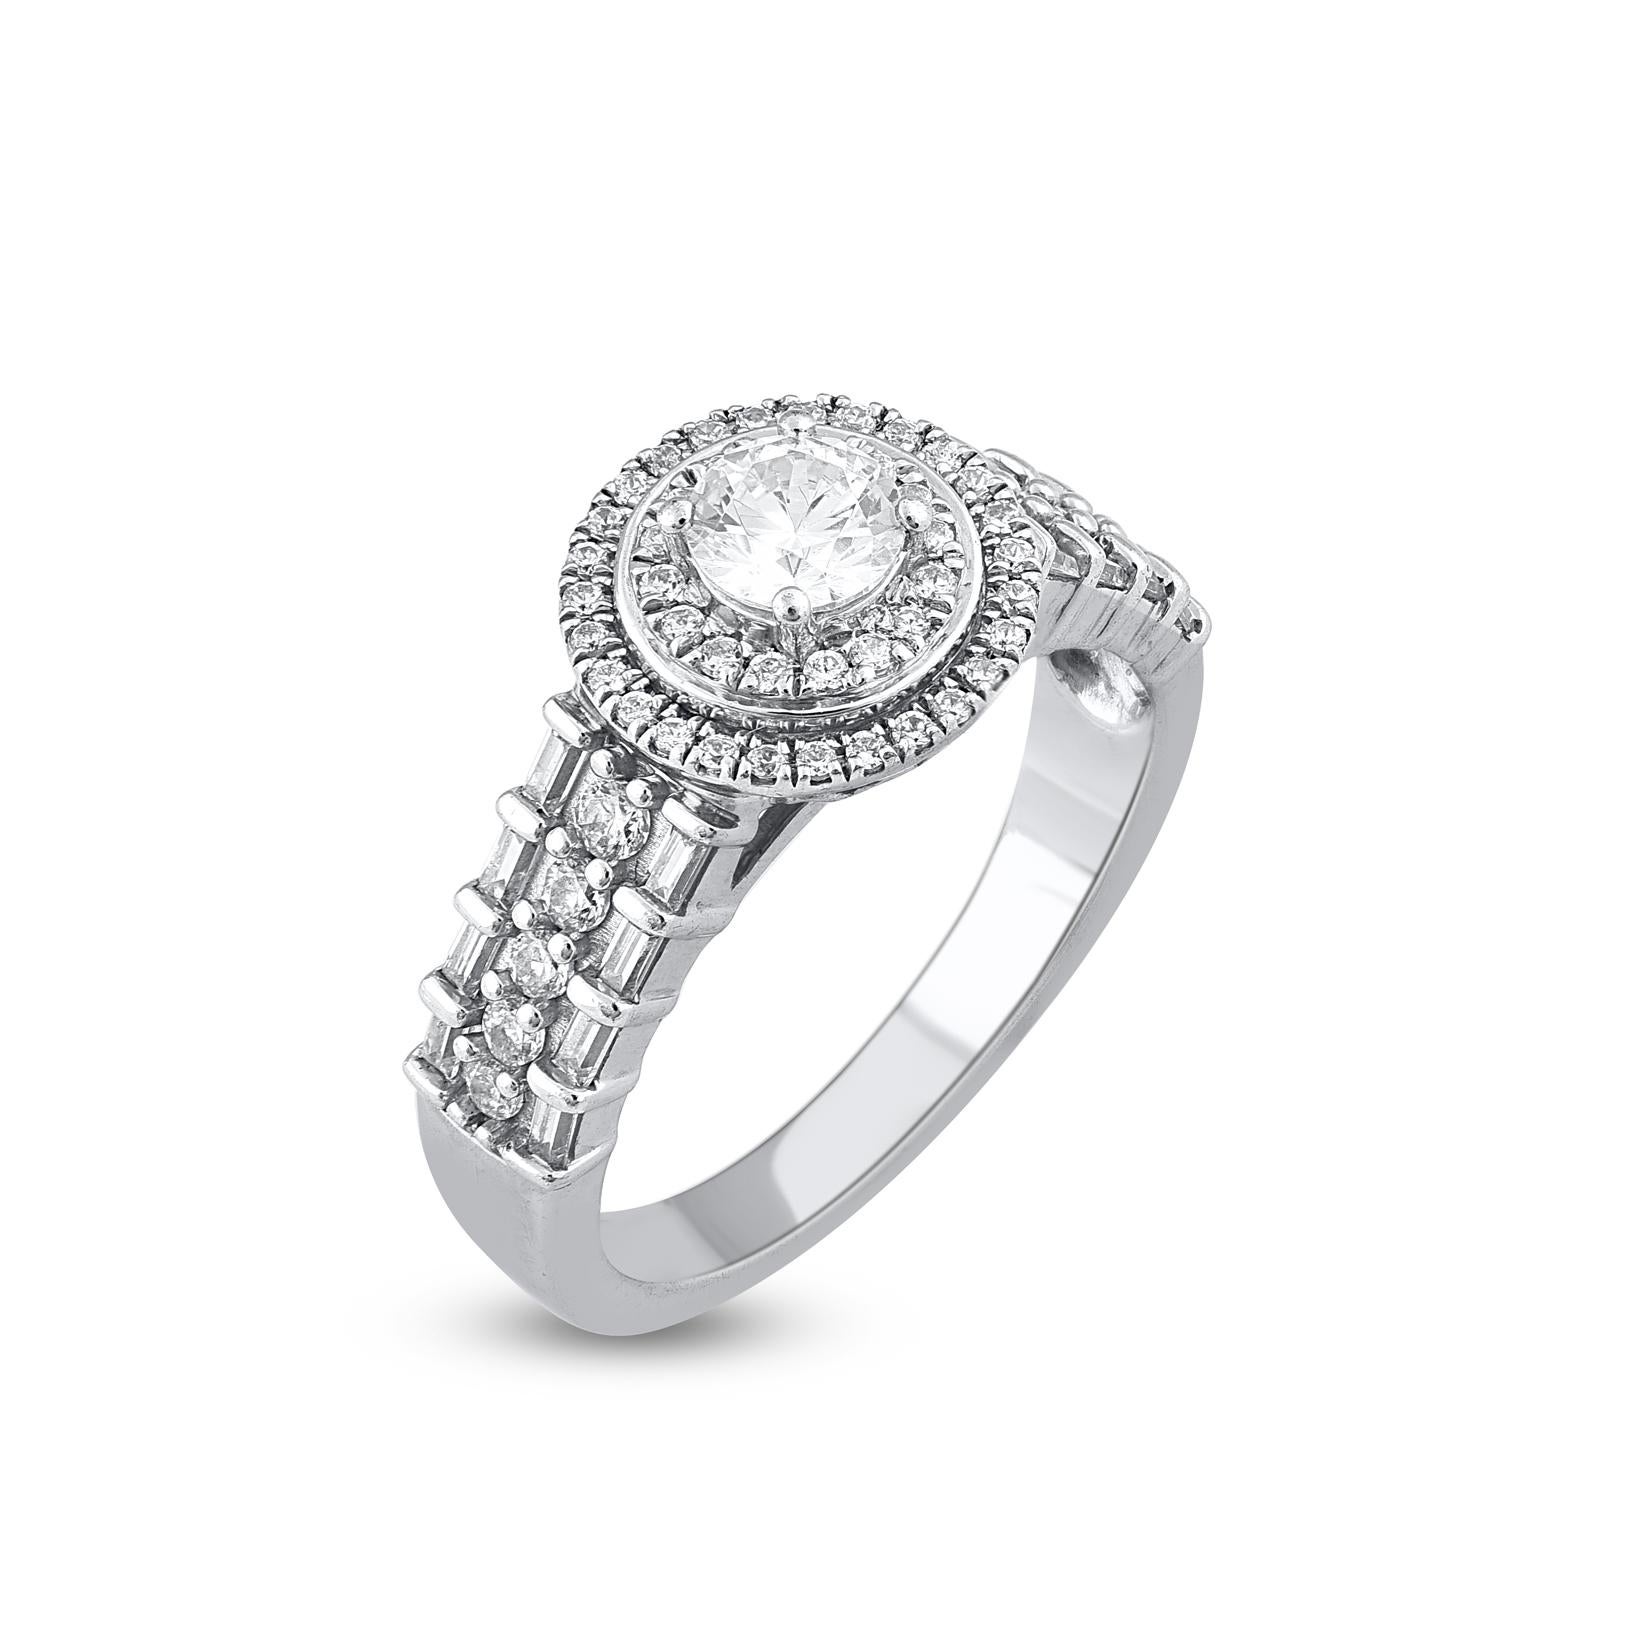 This Halo Engagement Ring is expertly crafted in 18 Karat White Gold and features 0.39ct center stone and 0.38ct of 53 round and 16 Baguette diamond double frame and lined shank in prong and channel setting. The diamonds are natural, not treated and